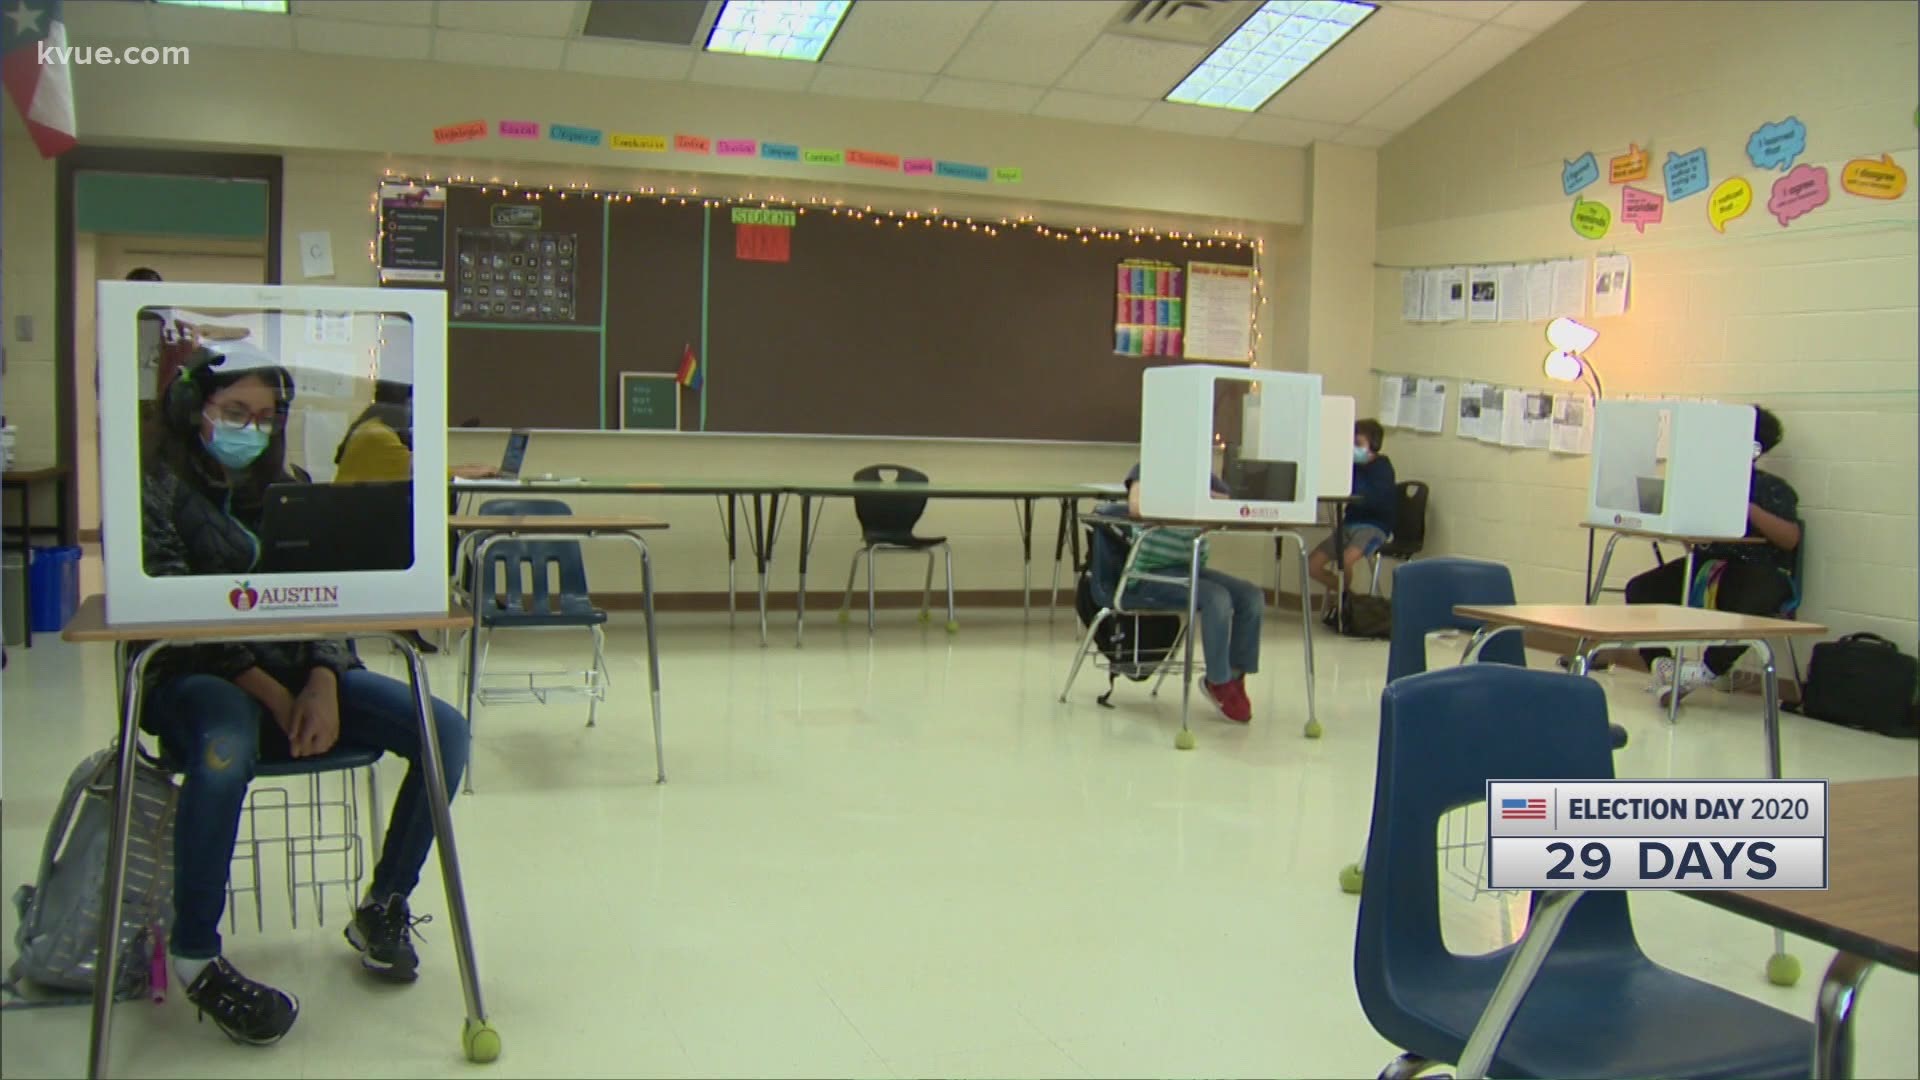 In-person learning started at 25% capacity for Austin ISD students on Monday. But some teachers think it's too soon for students and staff to return to campuses.